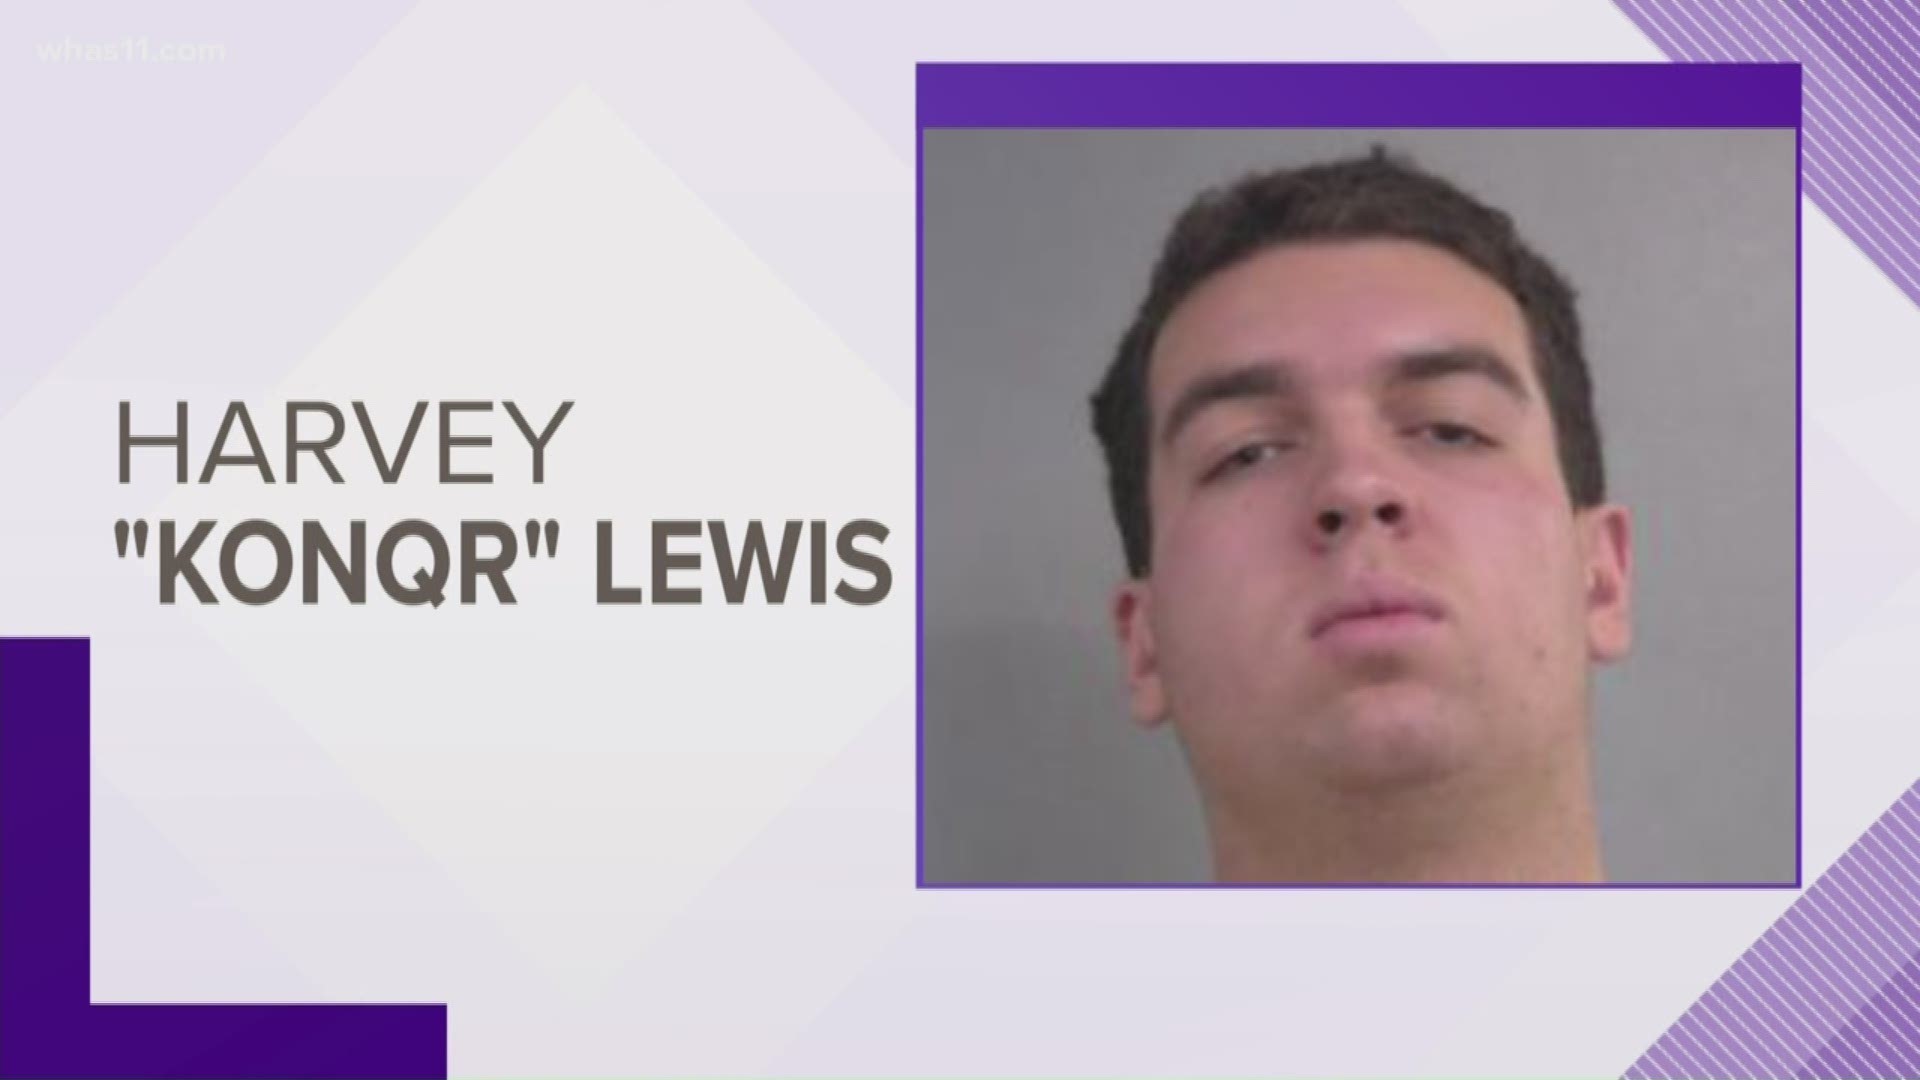 Police say Harvey Lewis was caught by officers spray painting a flood wall in the Portland neighborhood.